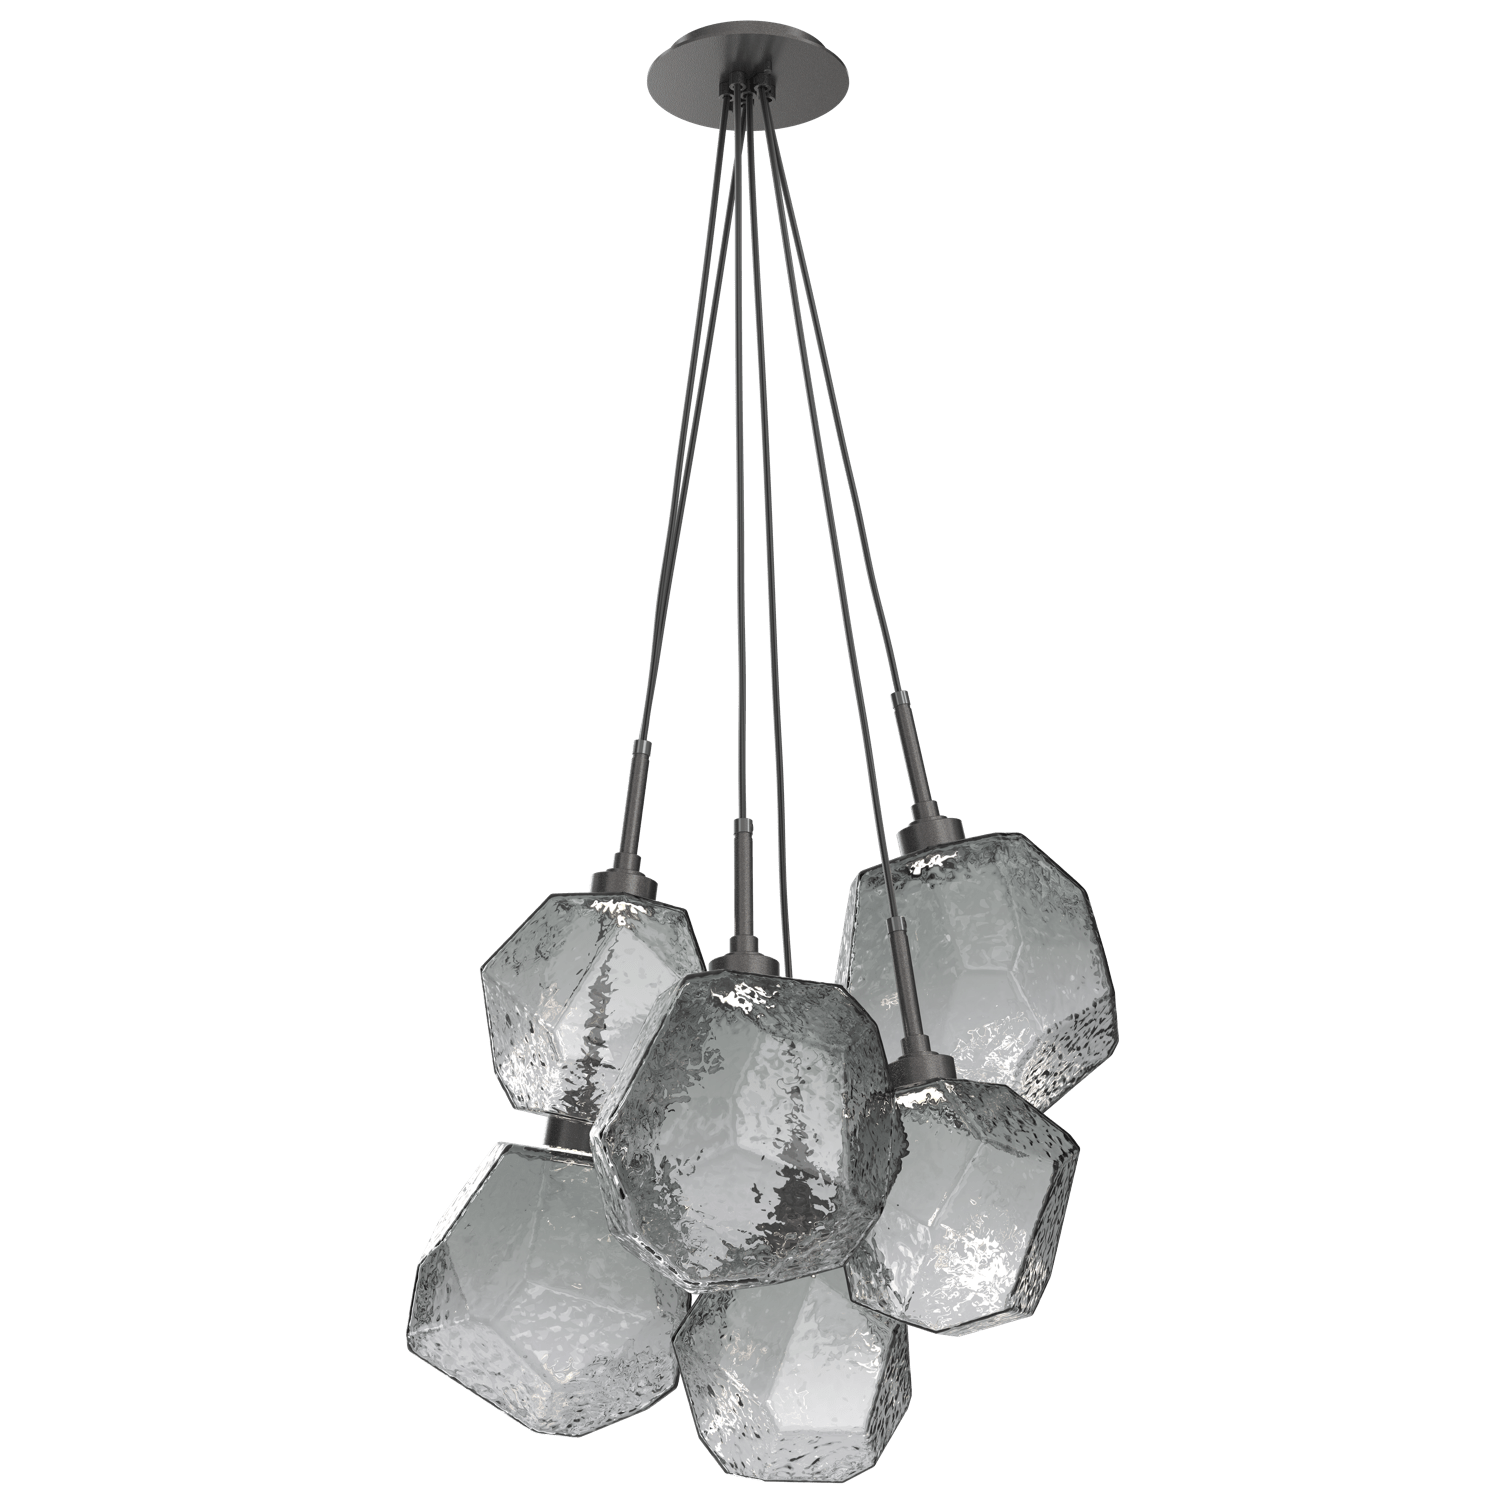 CHB0039-0F-GP-S-Hammerton-Studio-Gem-6-light-cluster-pendant-light-with-graphite-finish-and-smoke-blown-glass-shades-and-LED-lamping